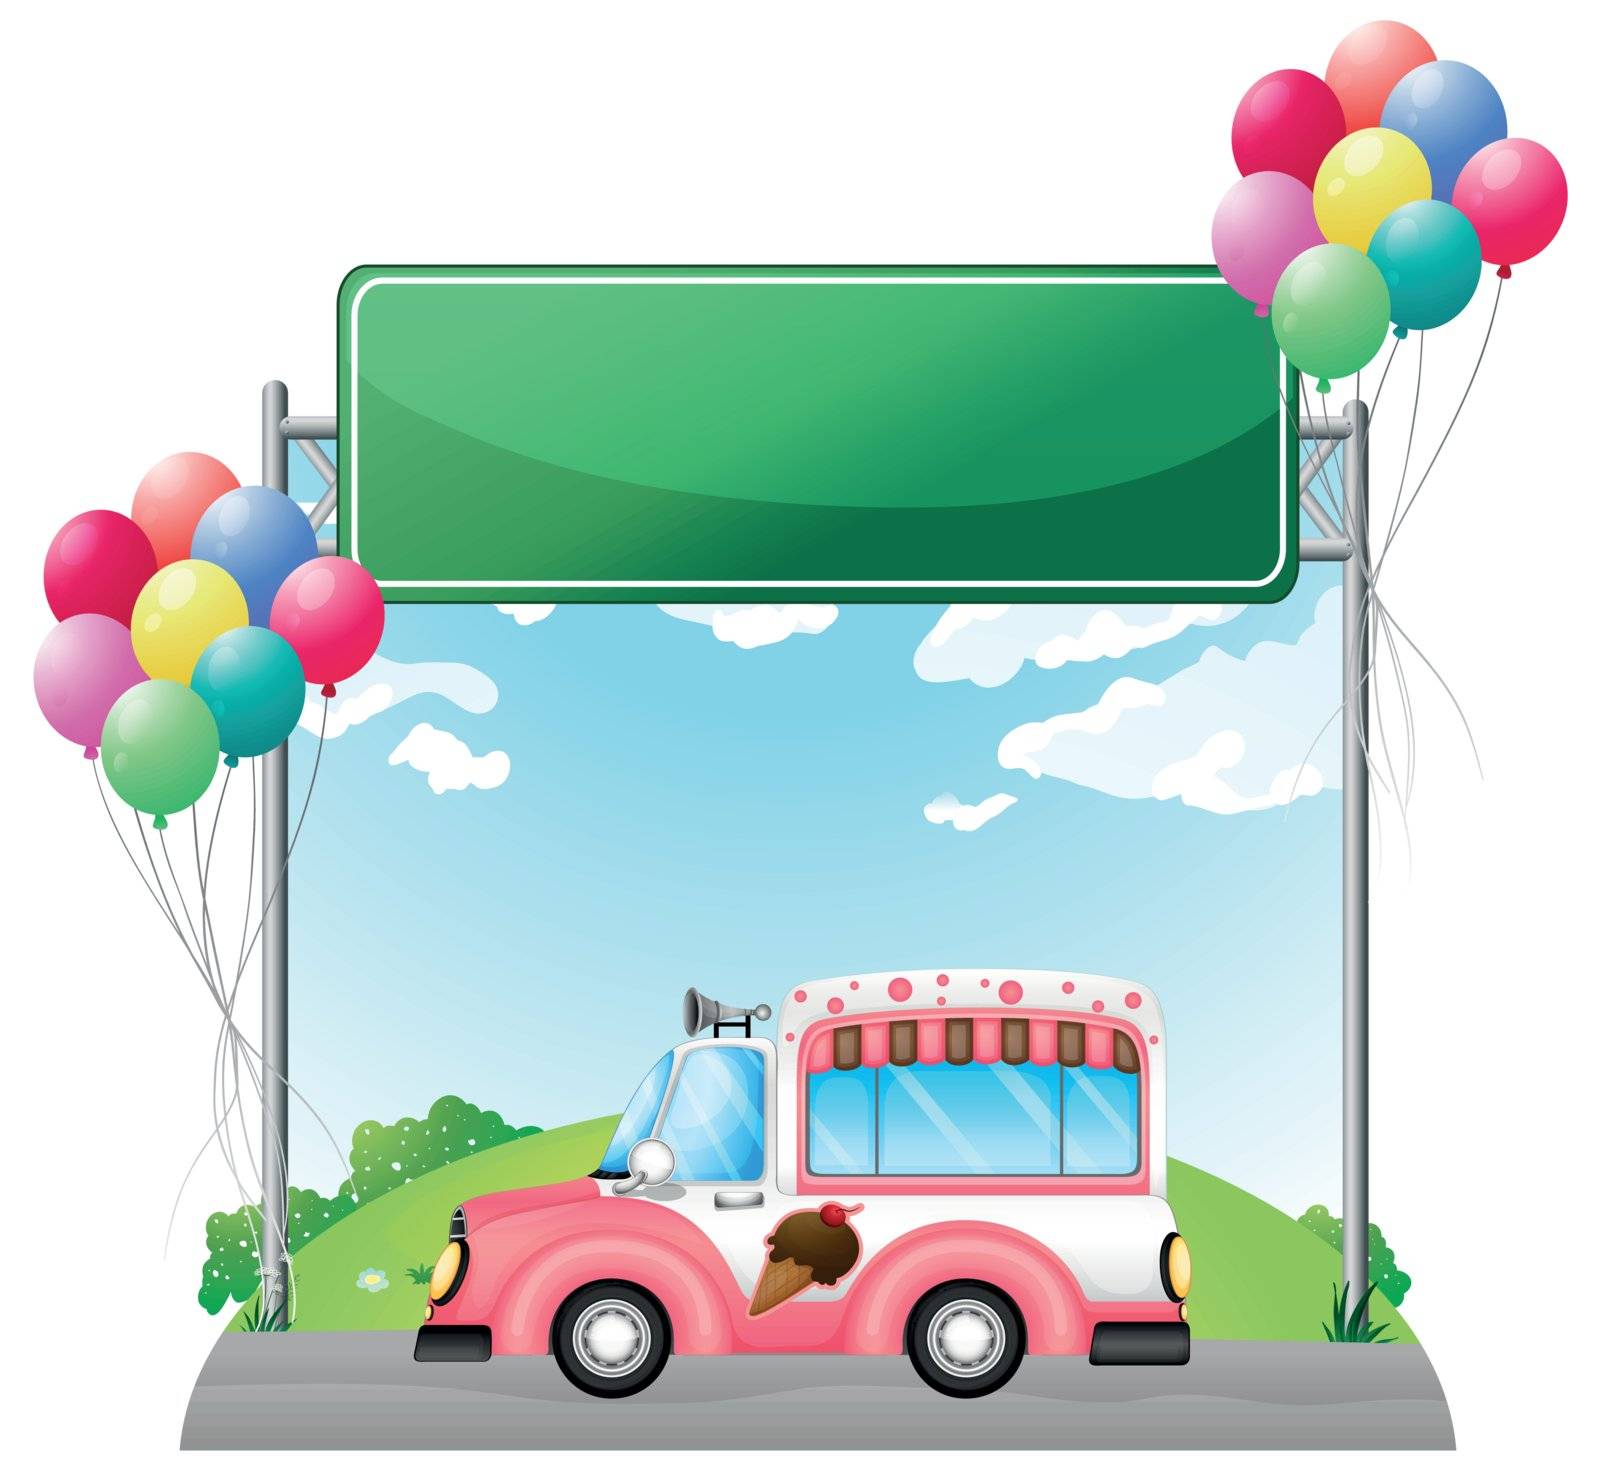 Illustration of a pink ice cream bus near an empty green board on a white background